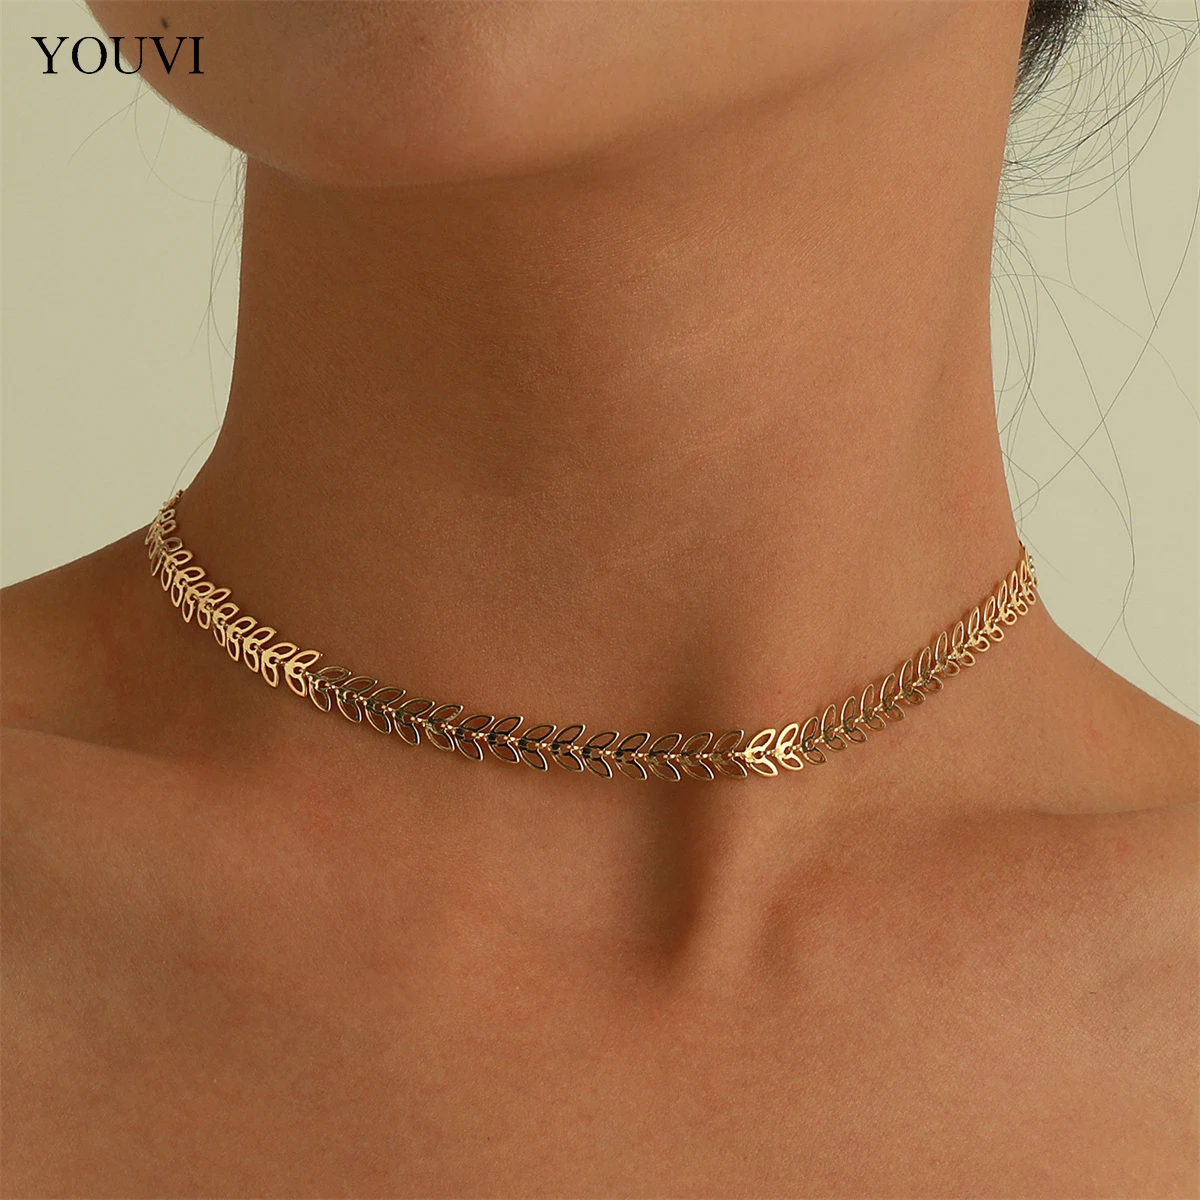 

YOUVI Vintage Women Necklace Chains Short Collares Necklaces Collier Choker Jewelry Charms Sexy Chain on the Neck 2021 Fashion